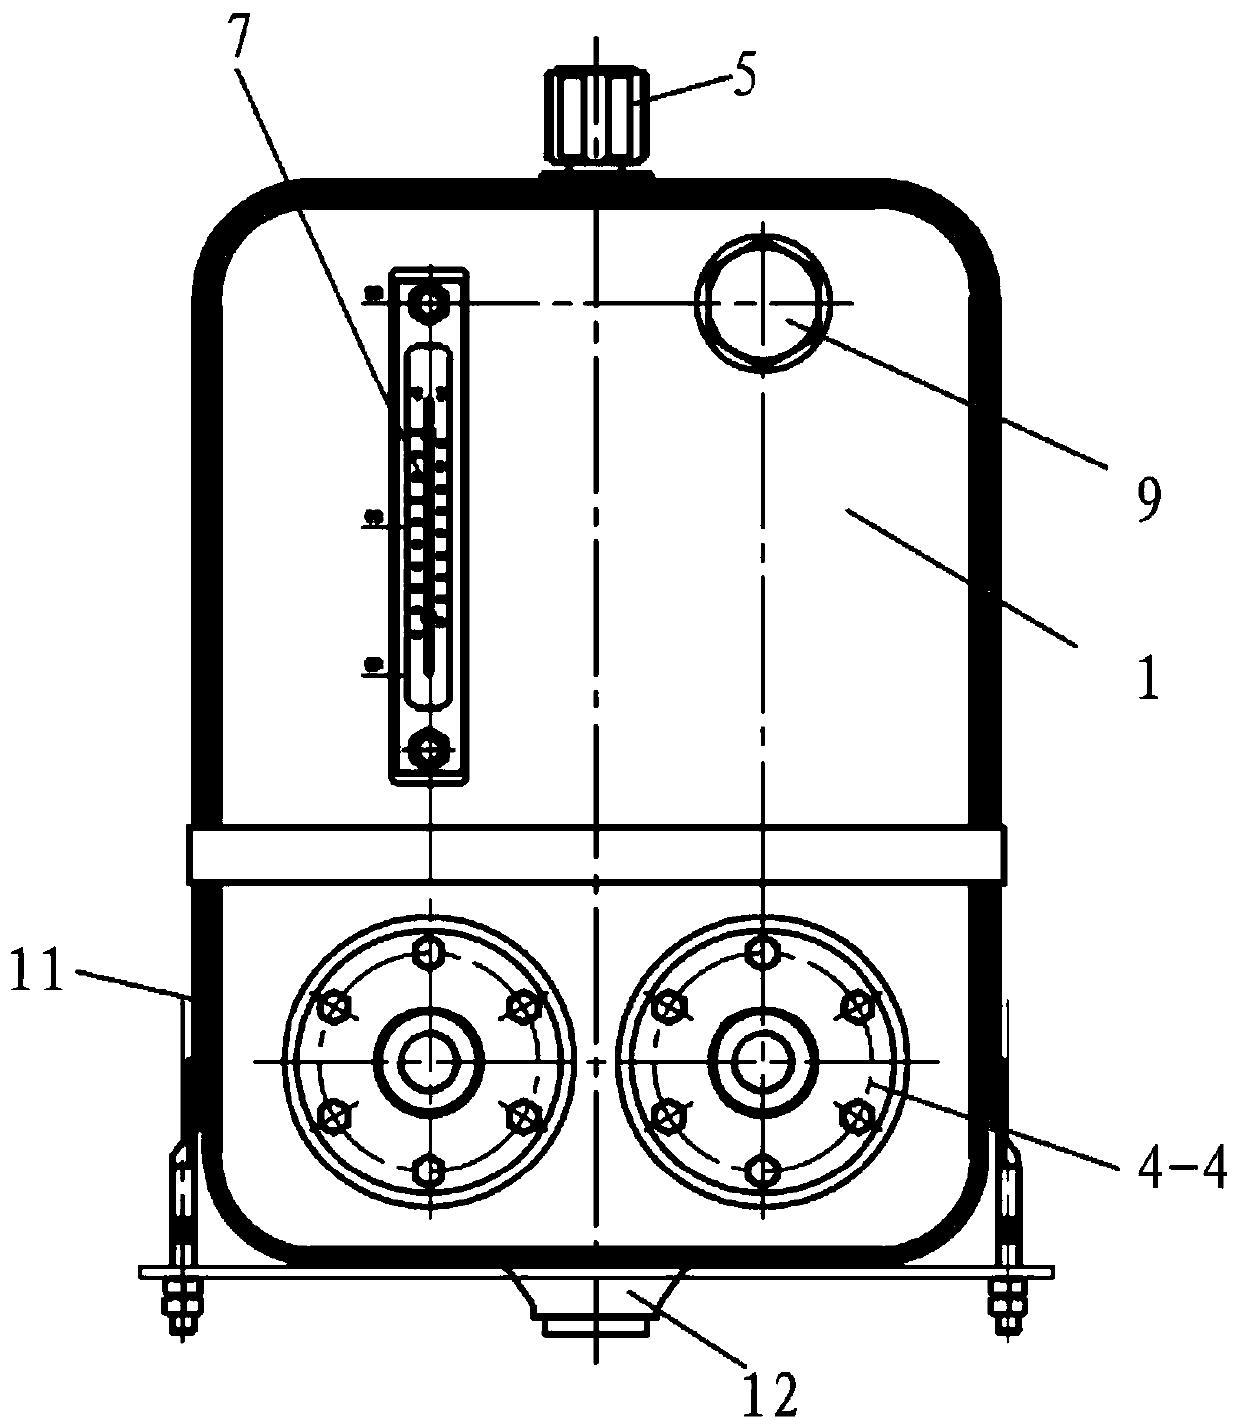 Hydraulic oil tank and vehicle